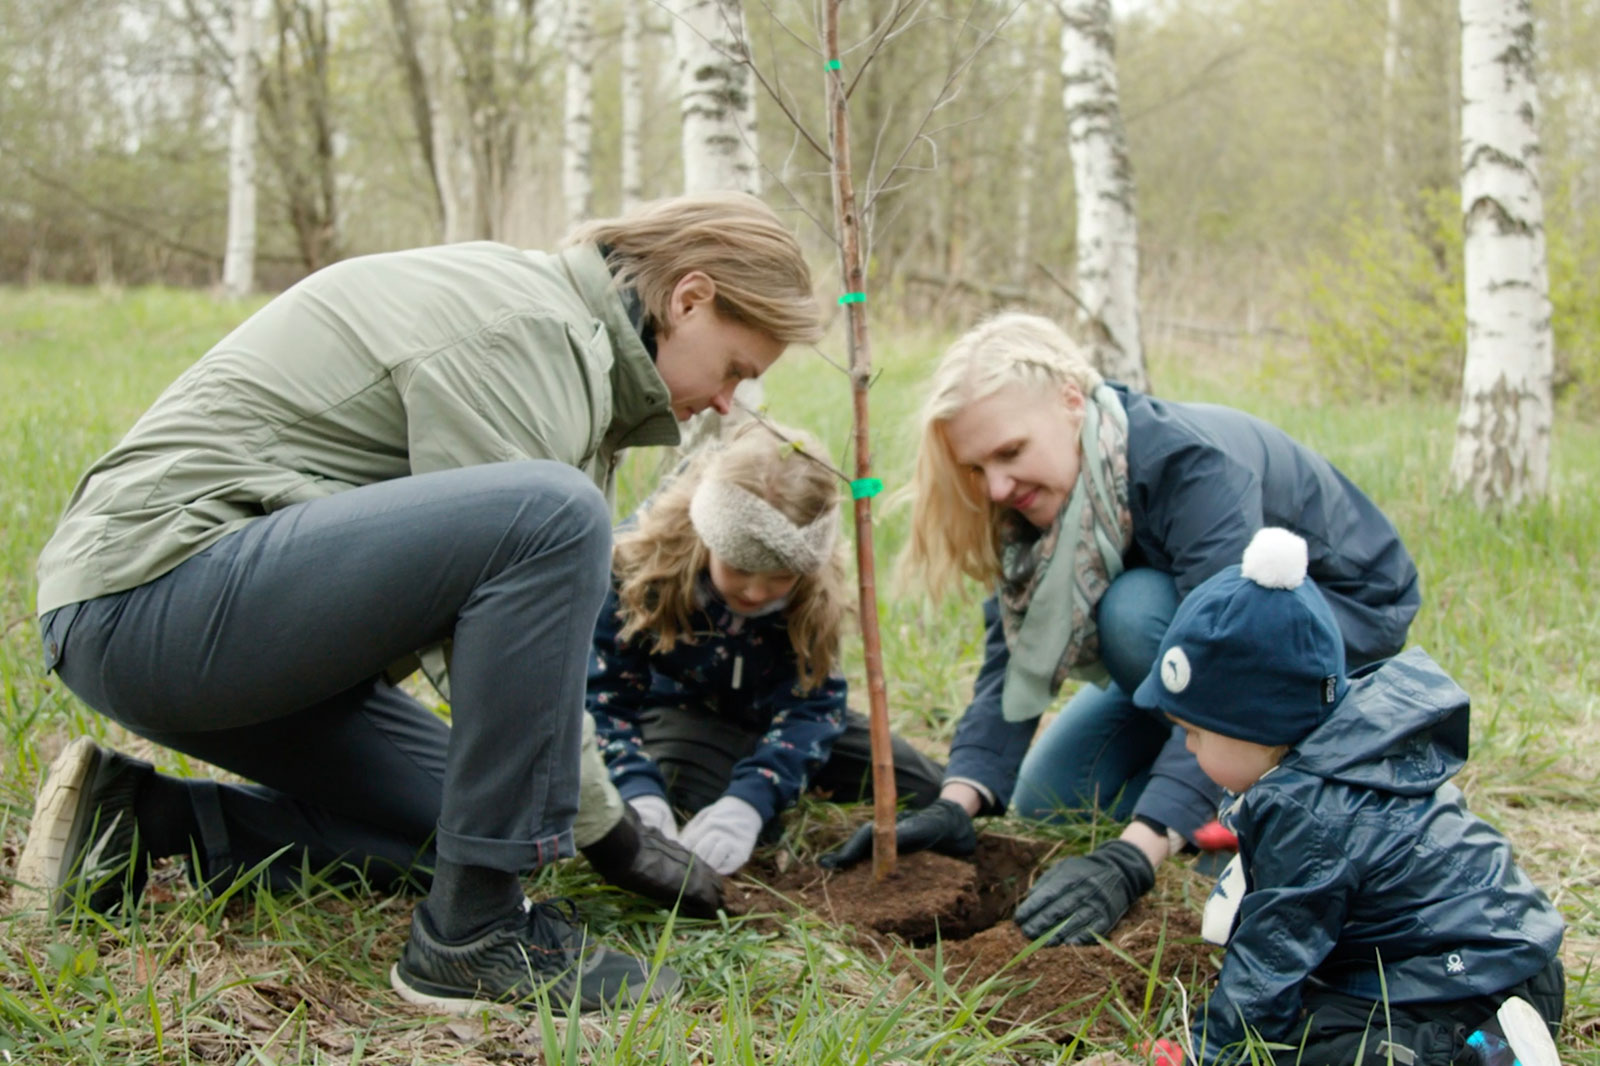 Two adults and two children planting a tree.